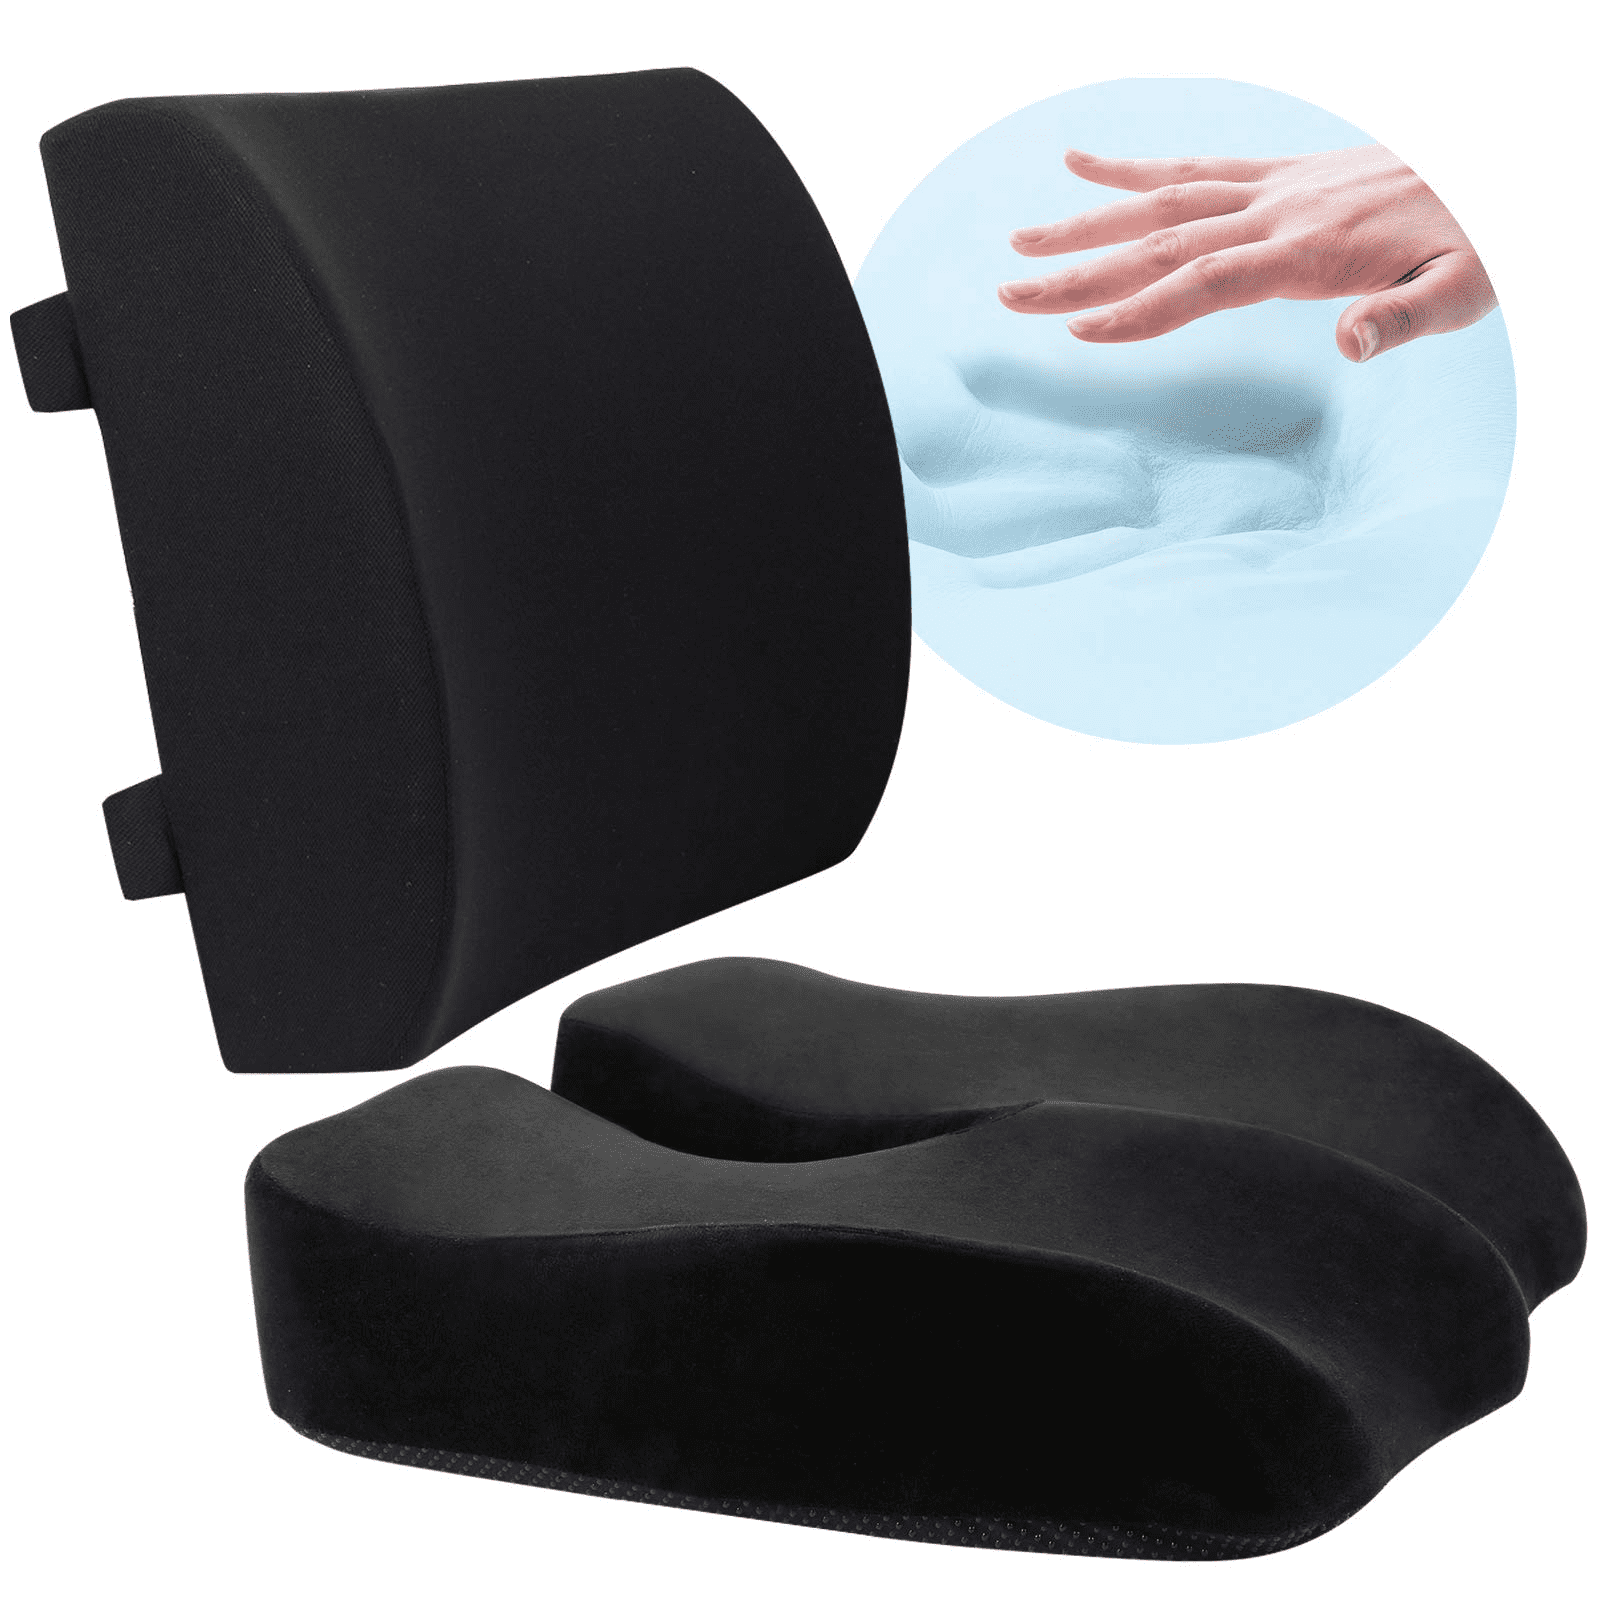 Ergonomic Back Support Pillow for  Back Pain Relief Khaki Memory Foam Back Cushion for Car Office Computer Chair Wishcush Lumbar Support Pillow